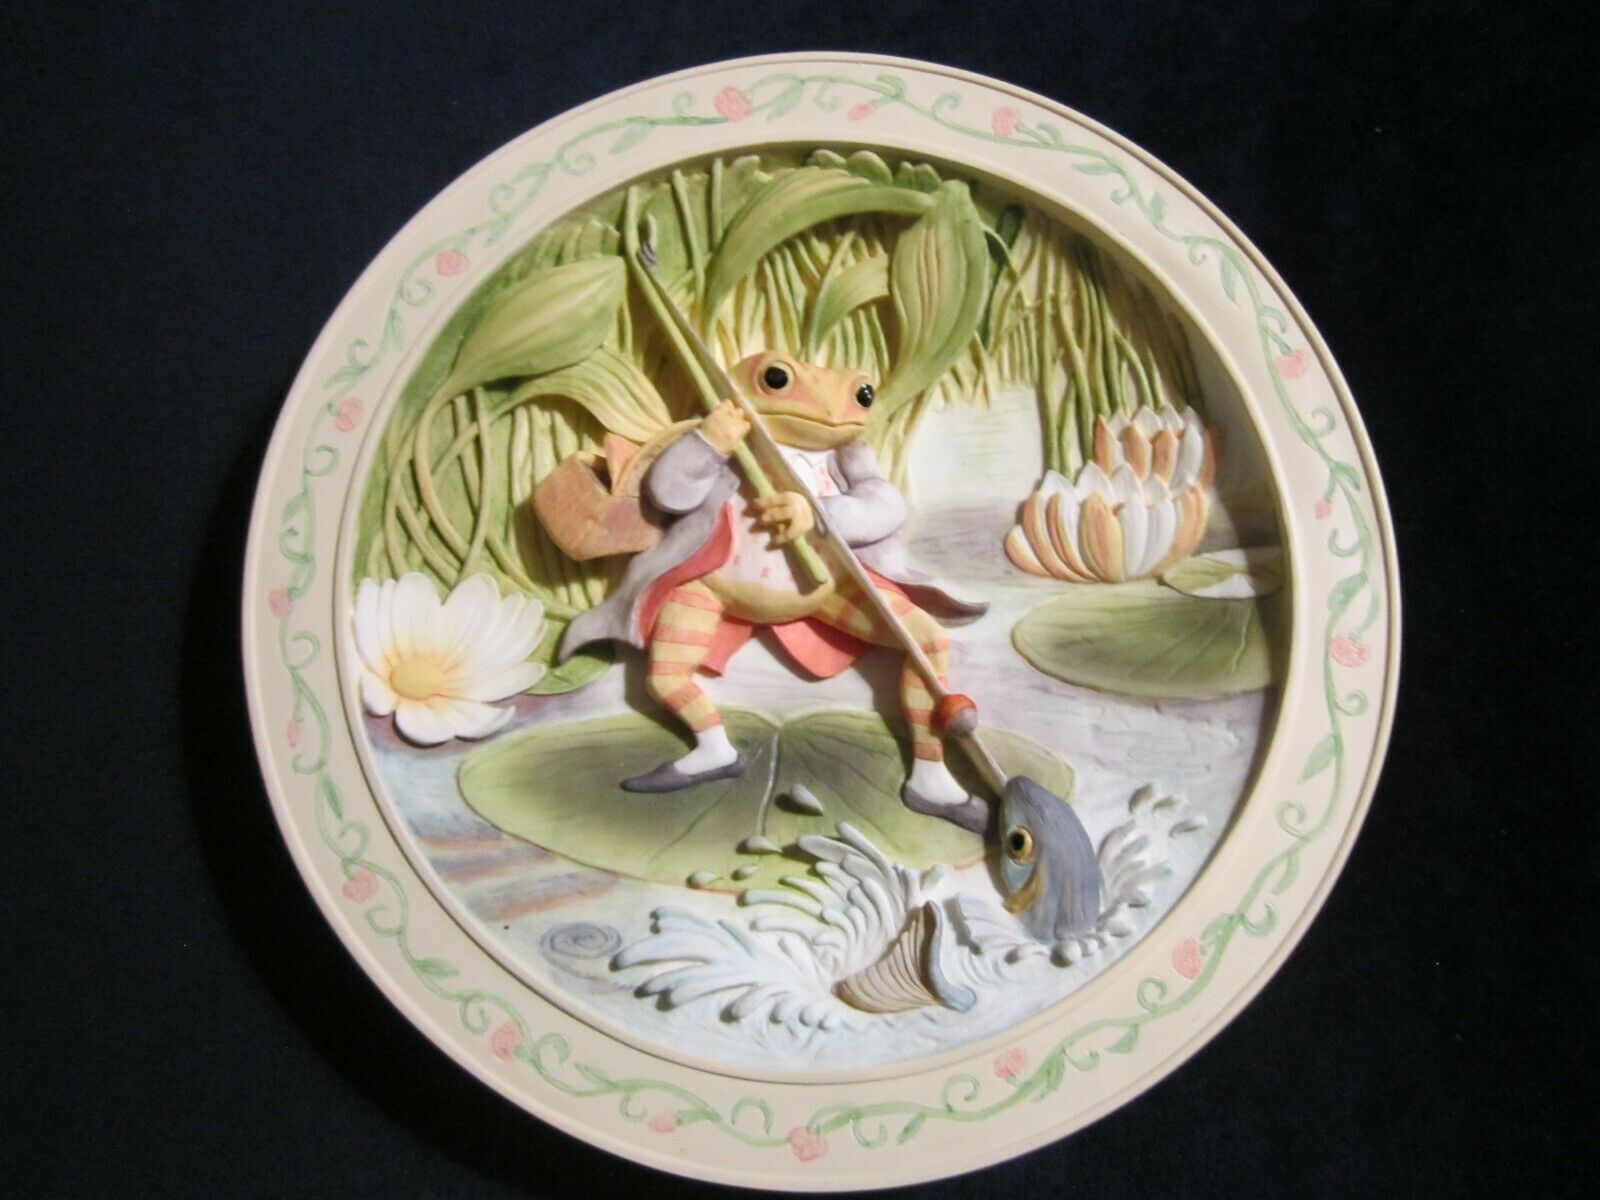 TALE OF MR. JEREMY FISHER 3-D collector plate WORLD OF BEATRIX POTTER Frog Fish - $64.00